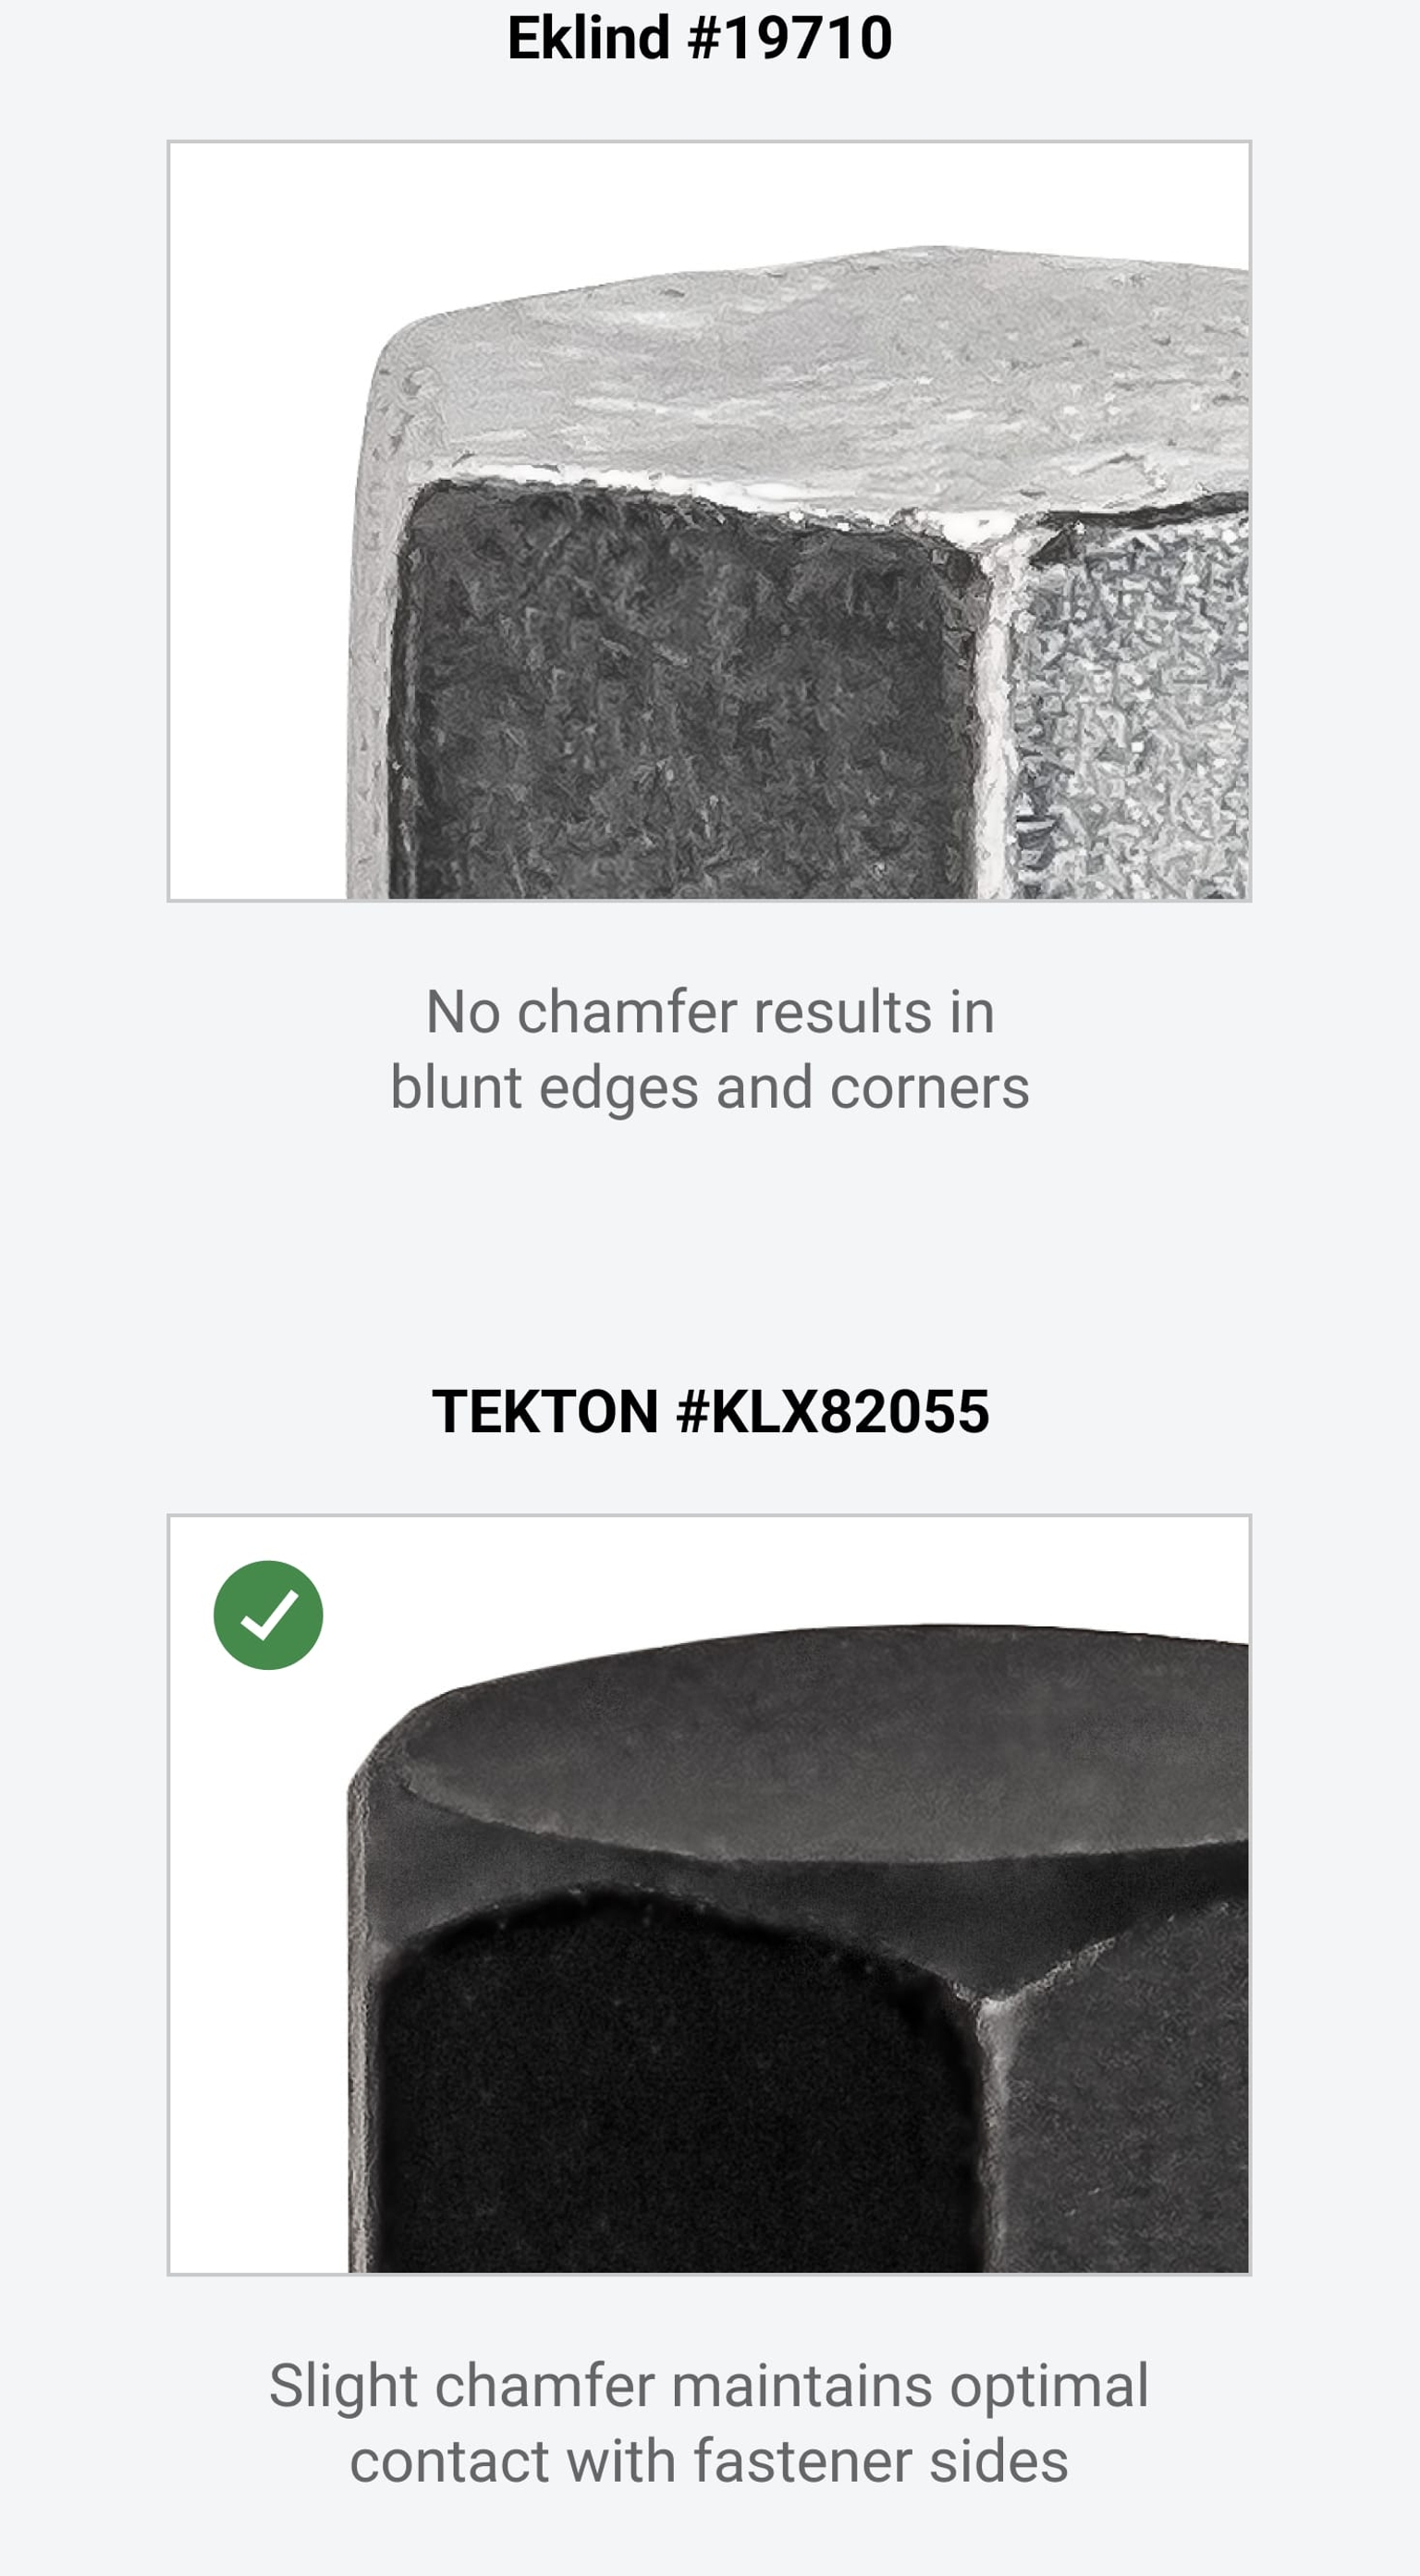 A closeup comparision of Tekton's hex key's chamfer edge with Eklind competitior hex key